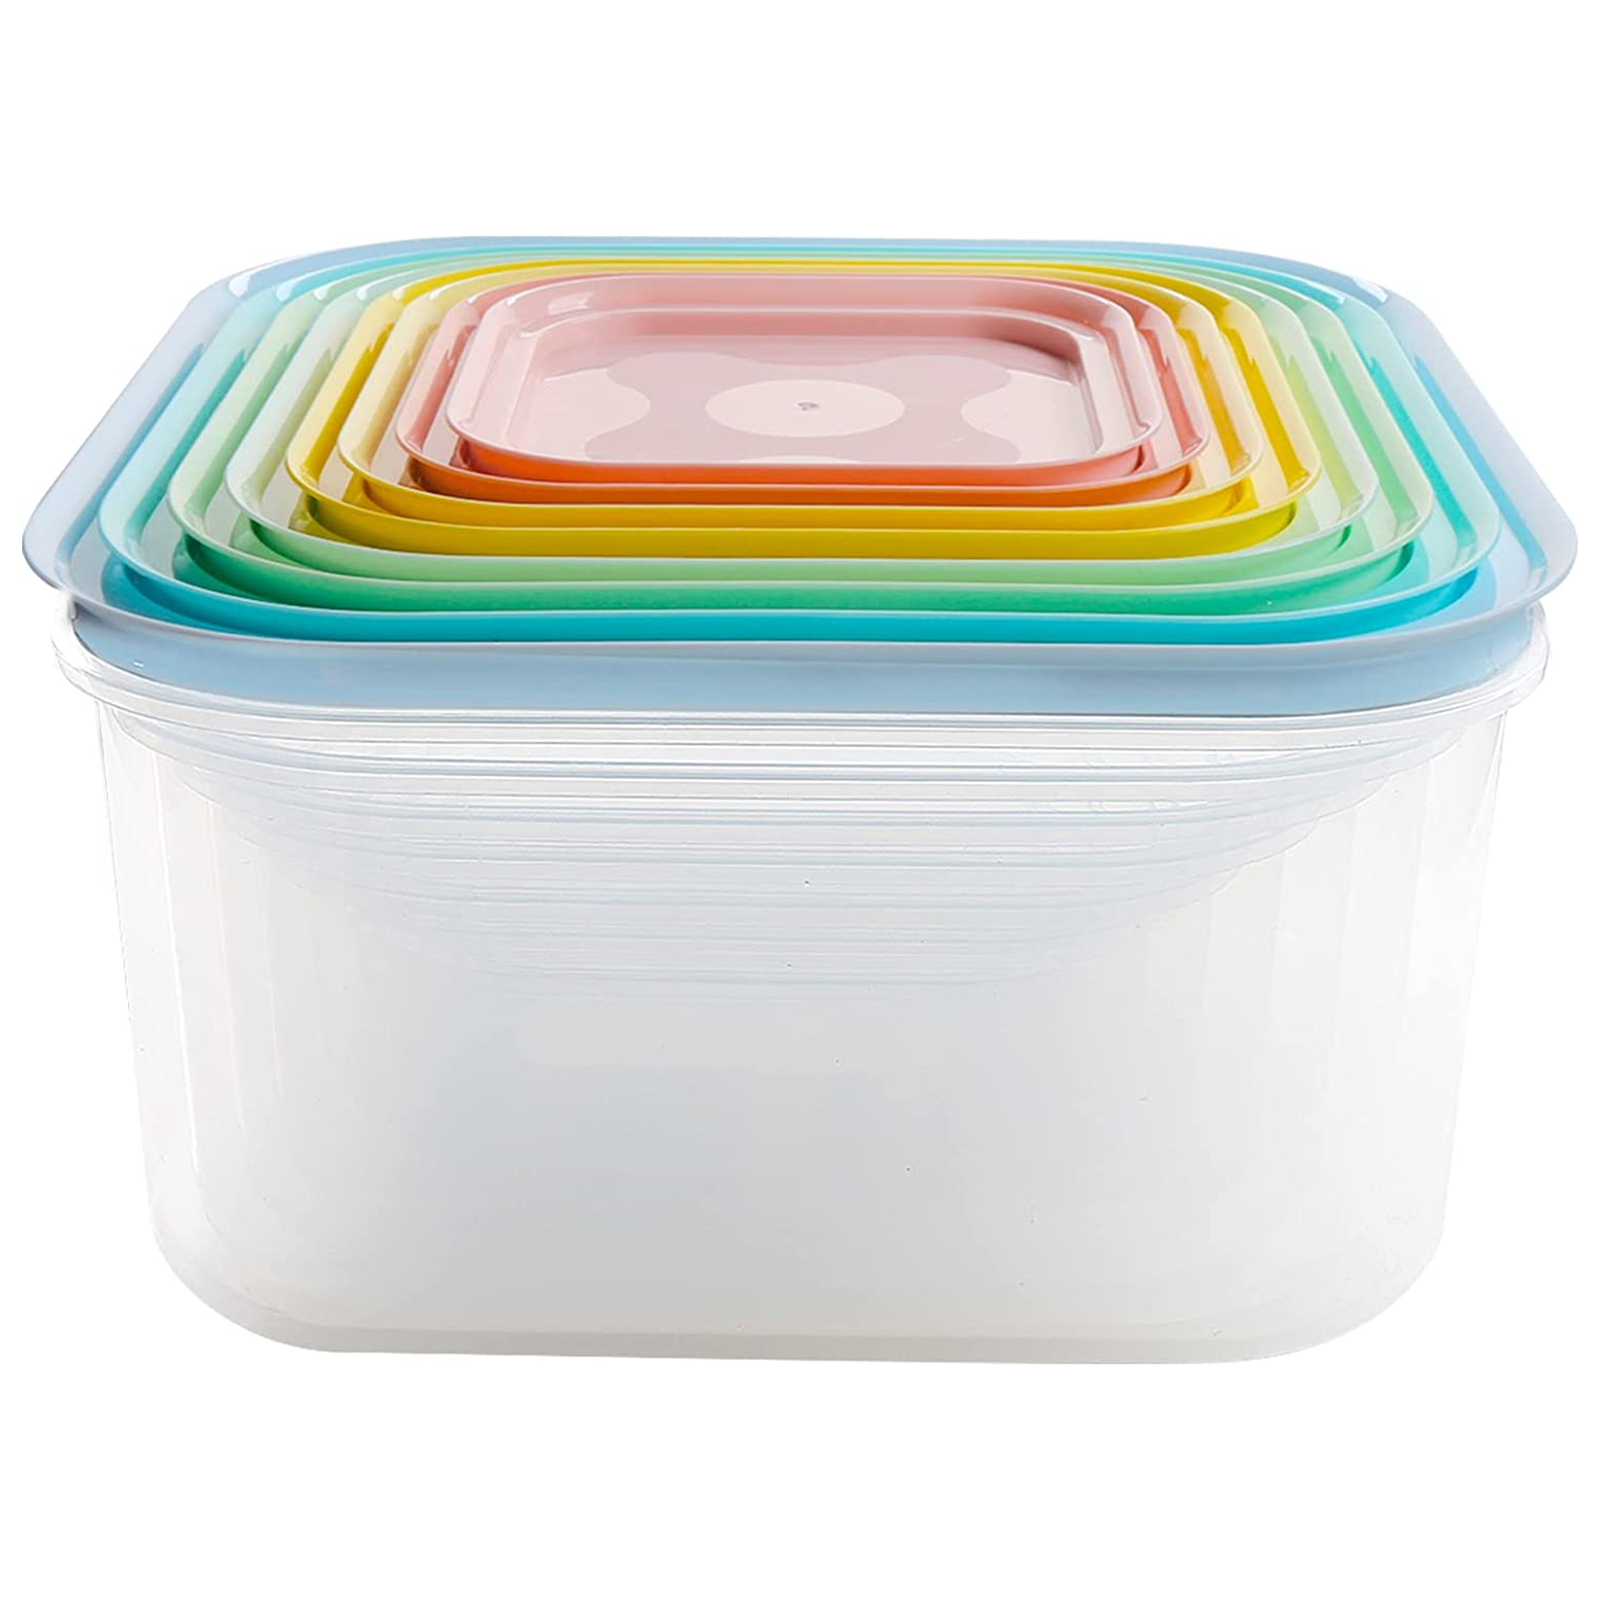 Shopwithgreen 8 Sets(16 Pieces) Multicolor Food Storage Containers - Square-shopwithgreen